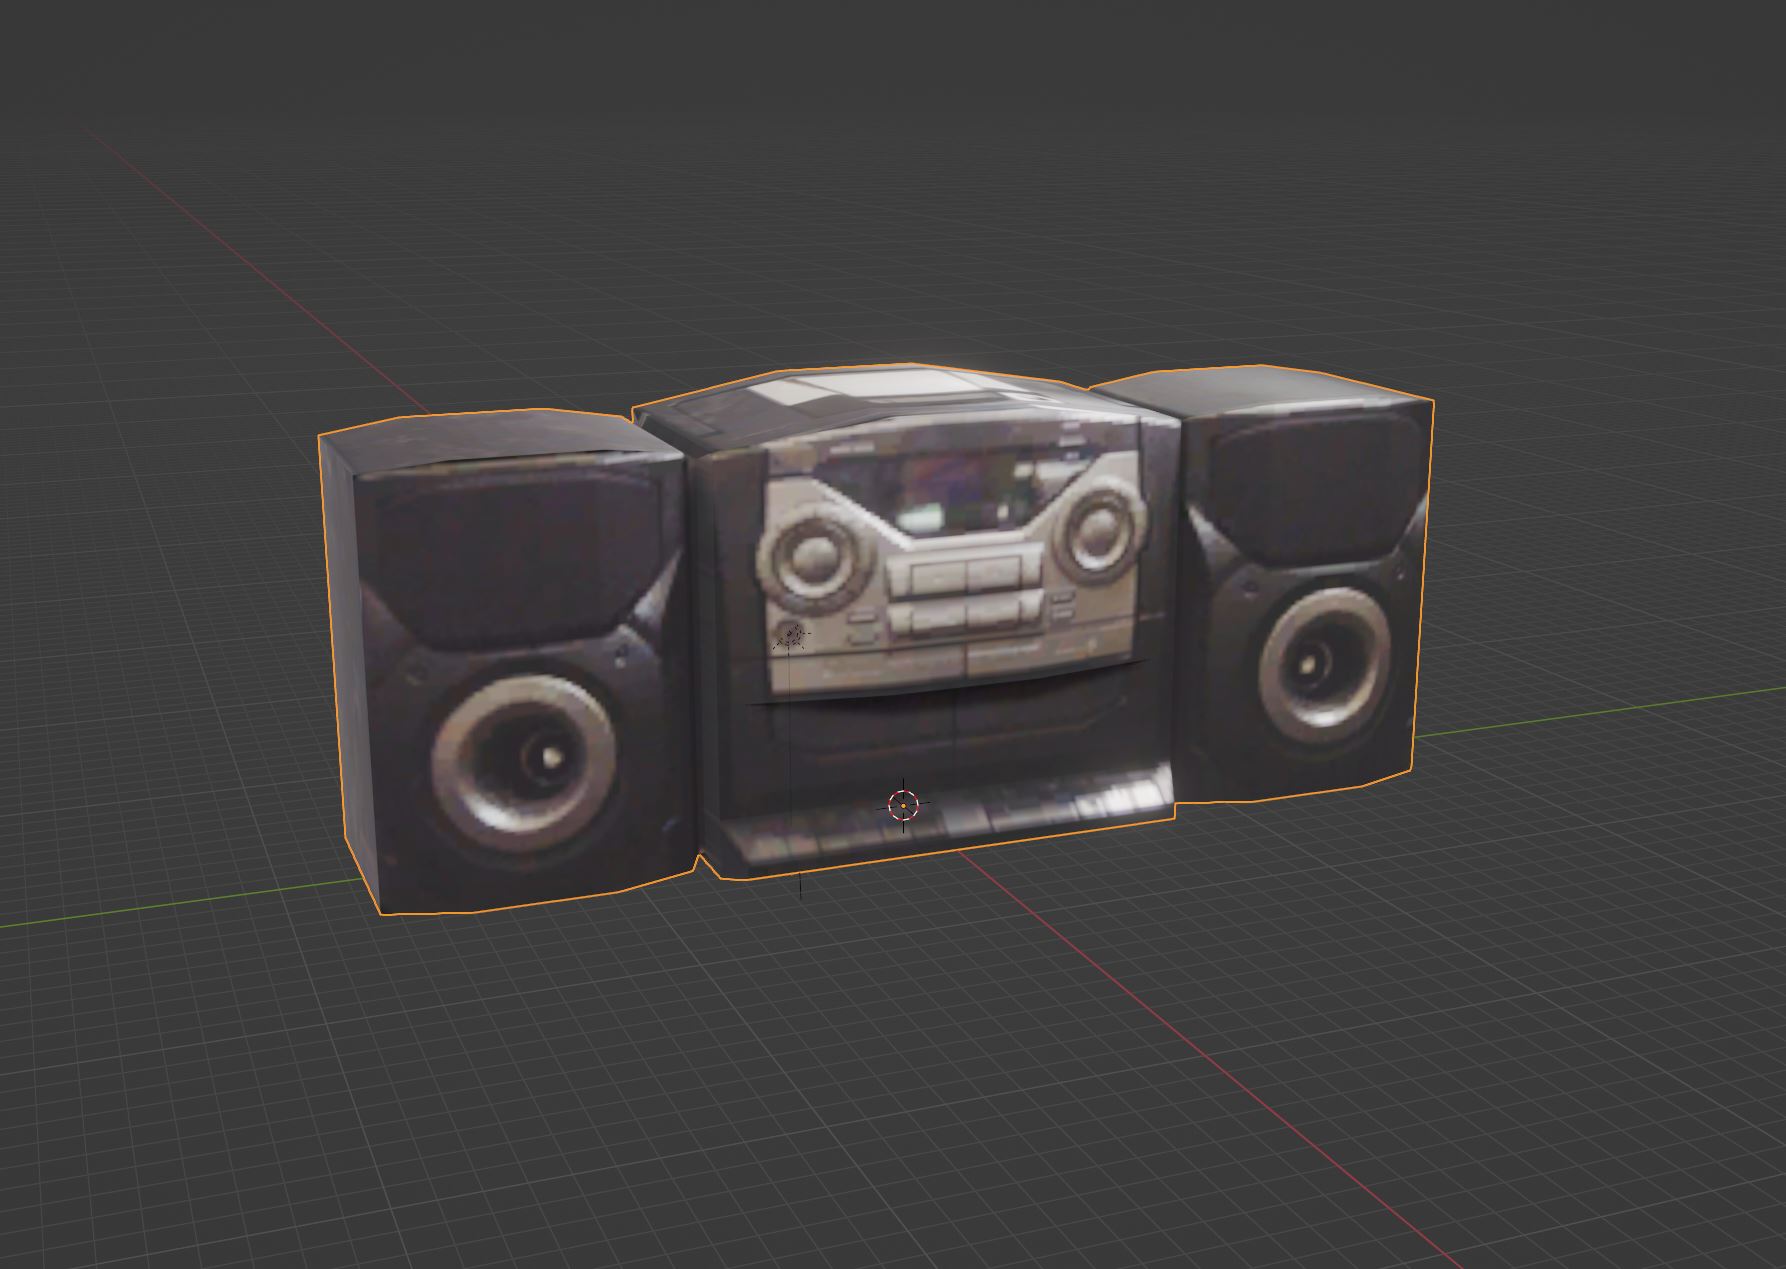 The old radio model with the old texture on it.